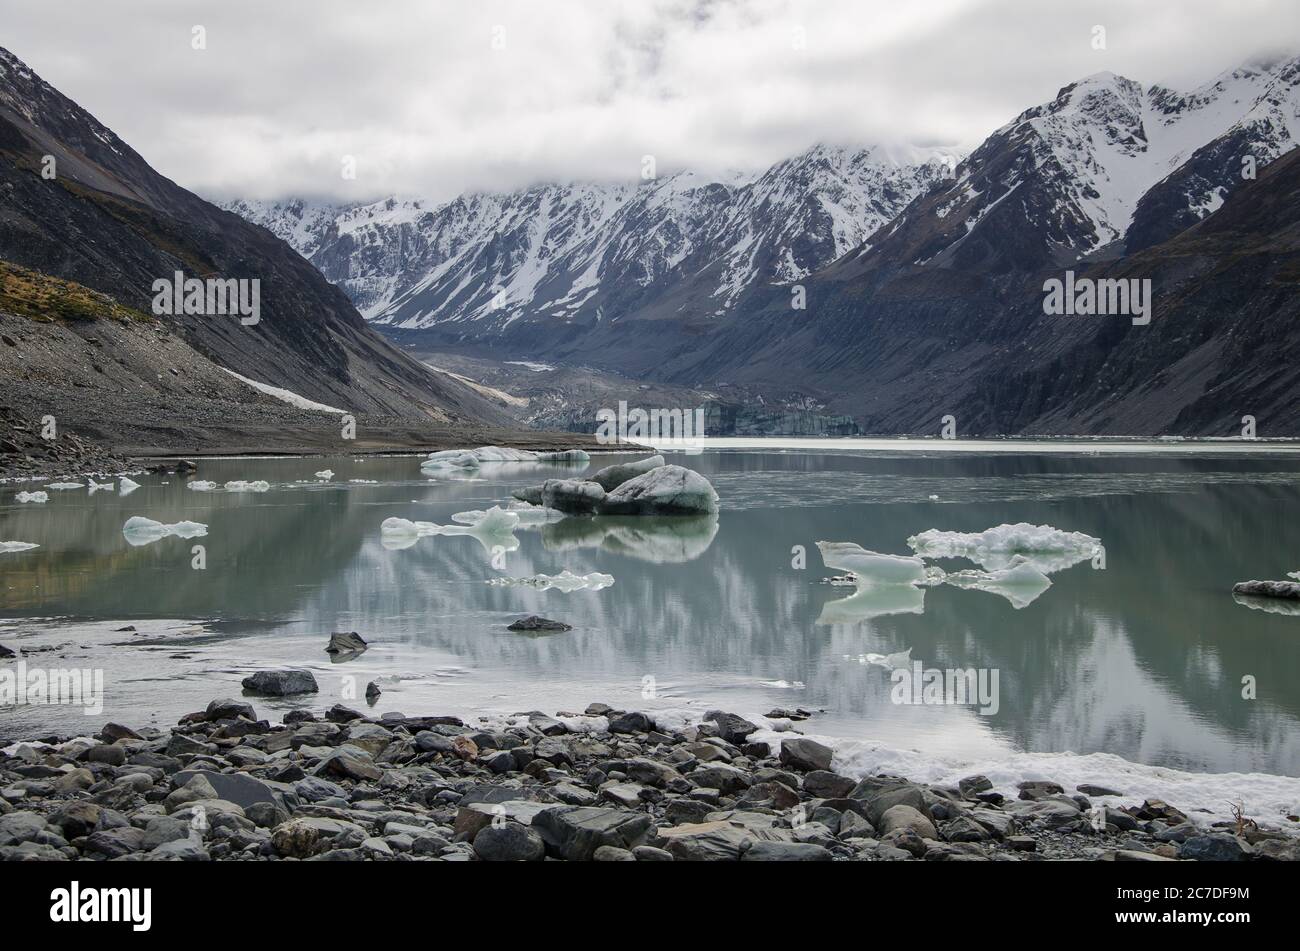 Icebergs on Hooker Lake in Mount Cook National Park, South Island, New Zealand Stock Photo